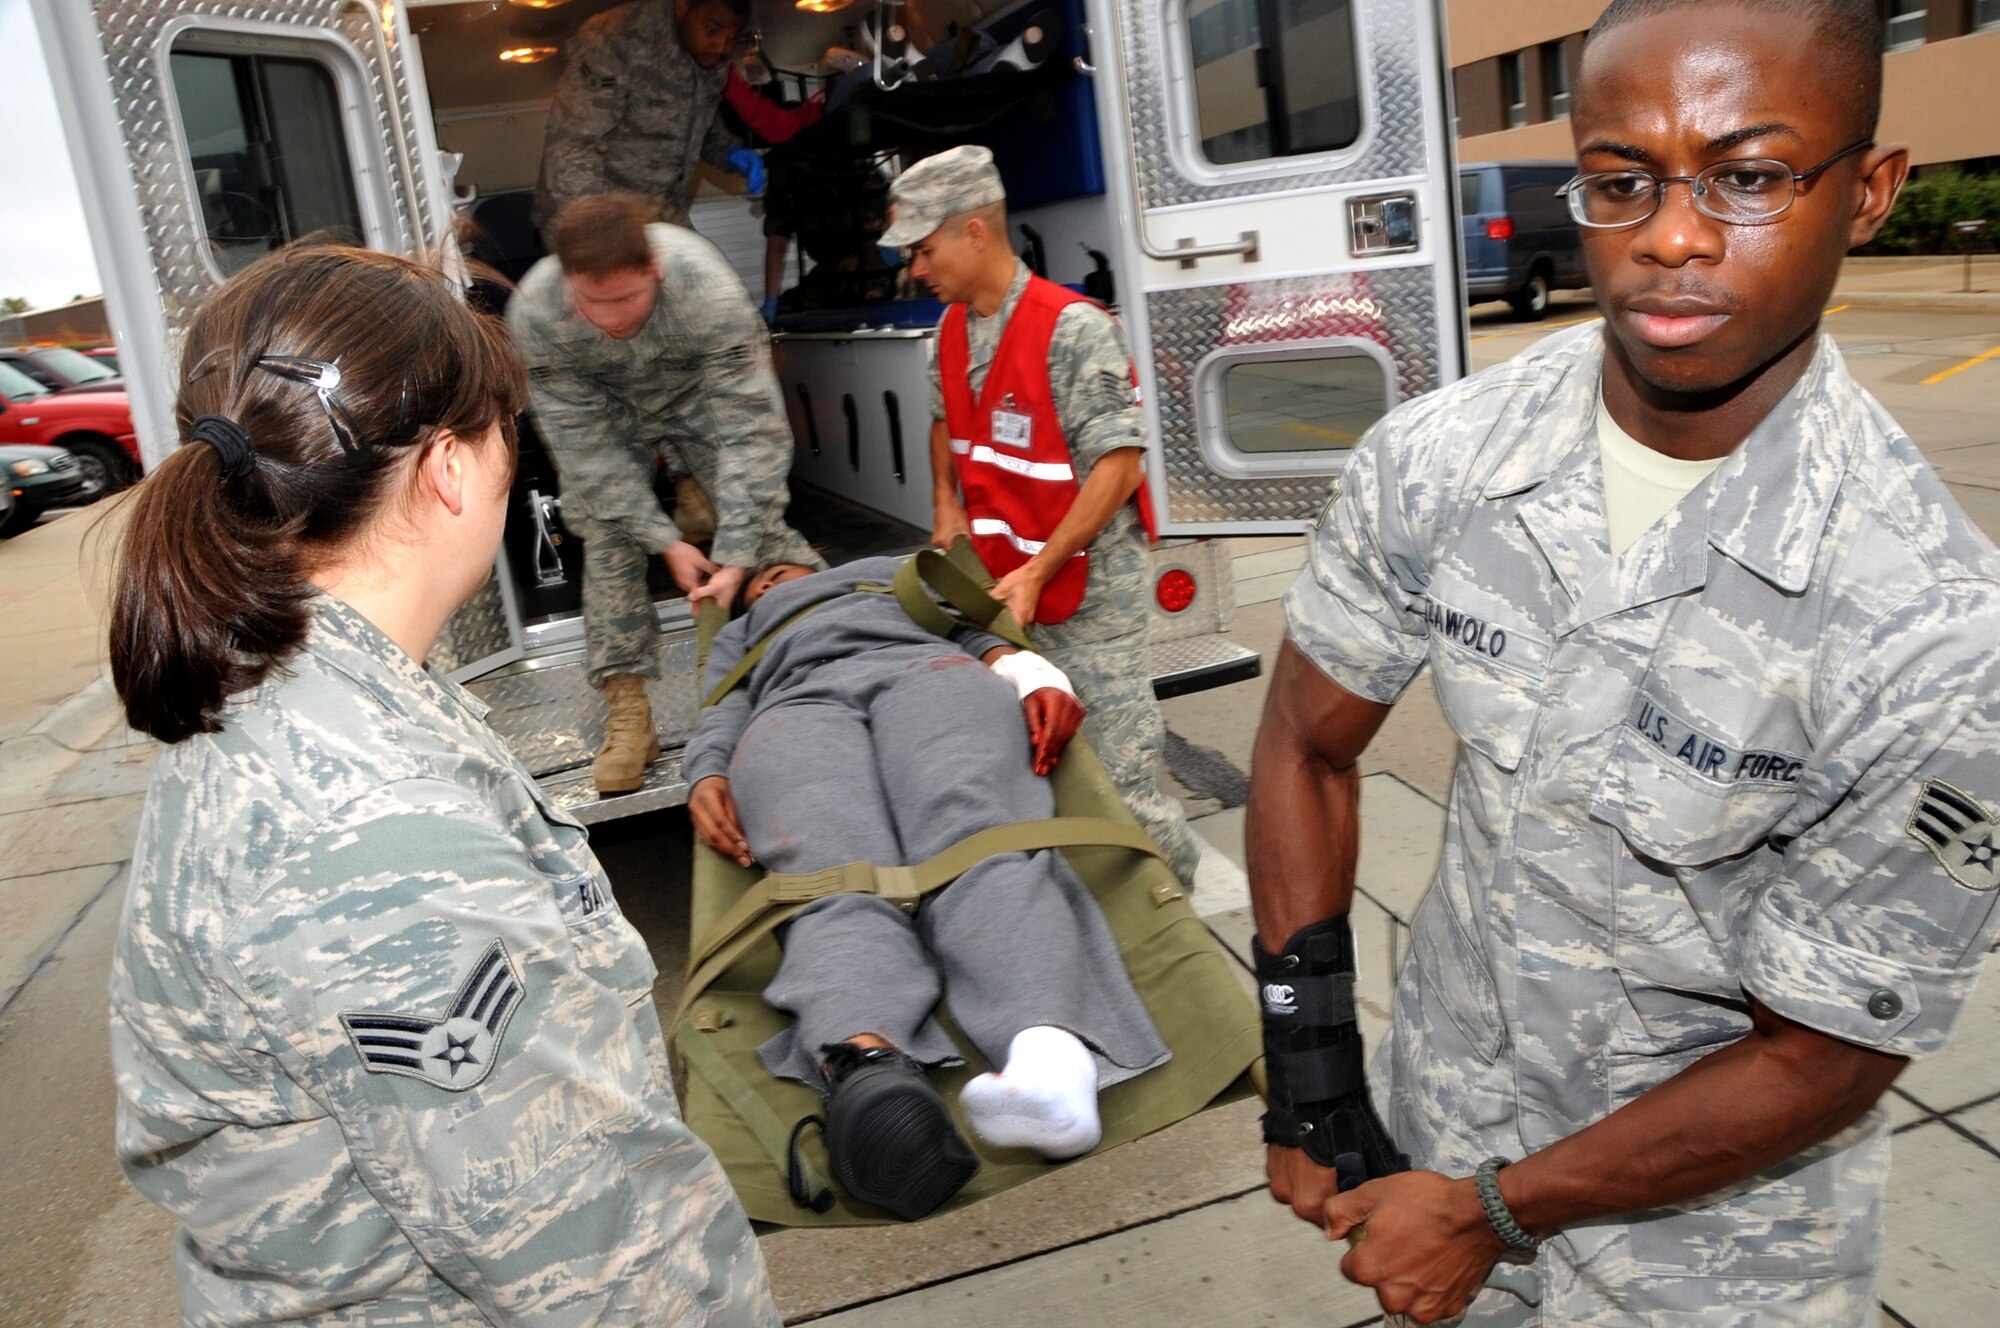 OFFUTT AIR FORCE BASE, Neb. - Airmen 1st Class Annah Bates and Isaac Zawolo, 55th Medical Group, help unload a simulated victim from an ambulance Sept. 10 as part of an active shooter exercise on base. Team Offutt's first responders conduct various exercise scenarios throughout the year to prepare for possible threats to people and resources.  U.S. Air Force photo by Jeff W. Gates